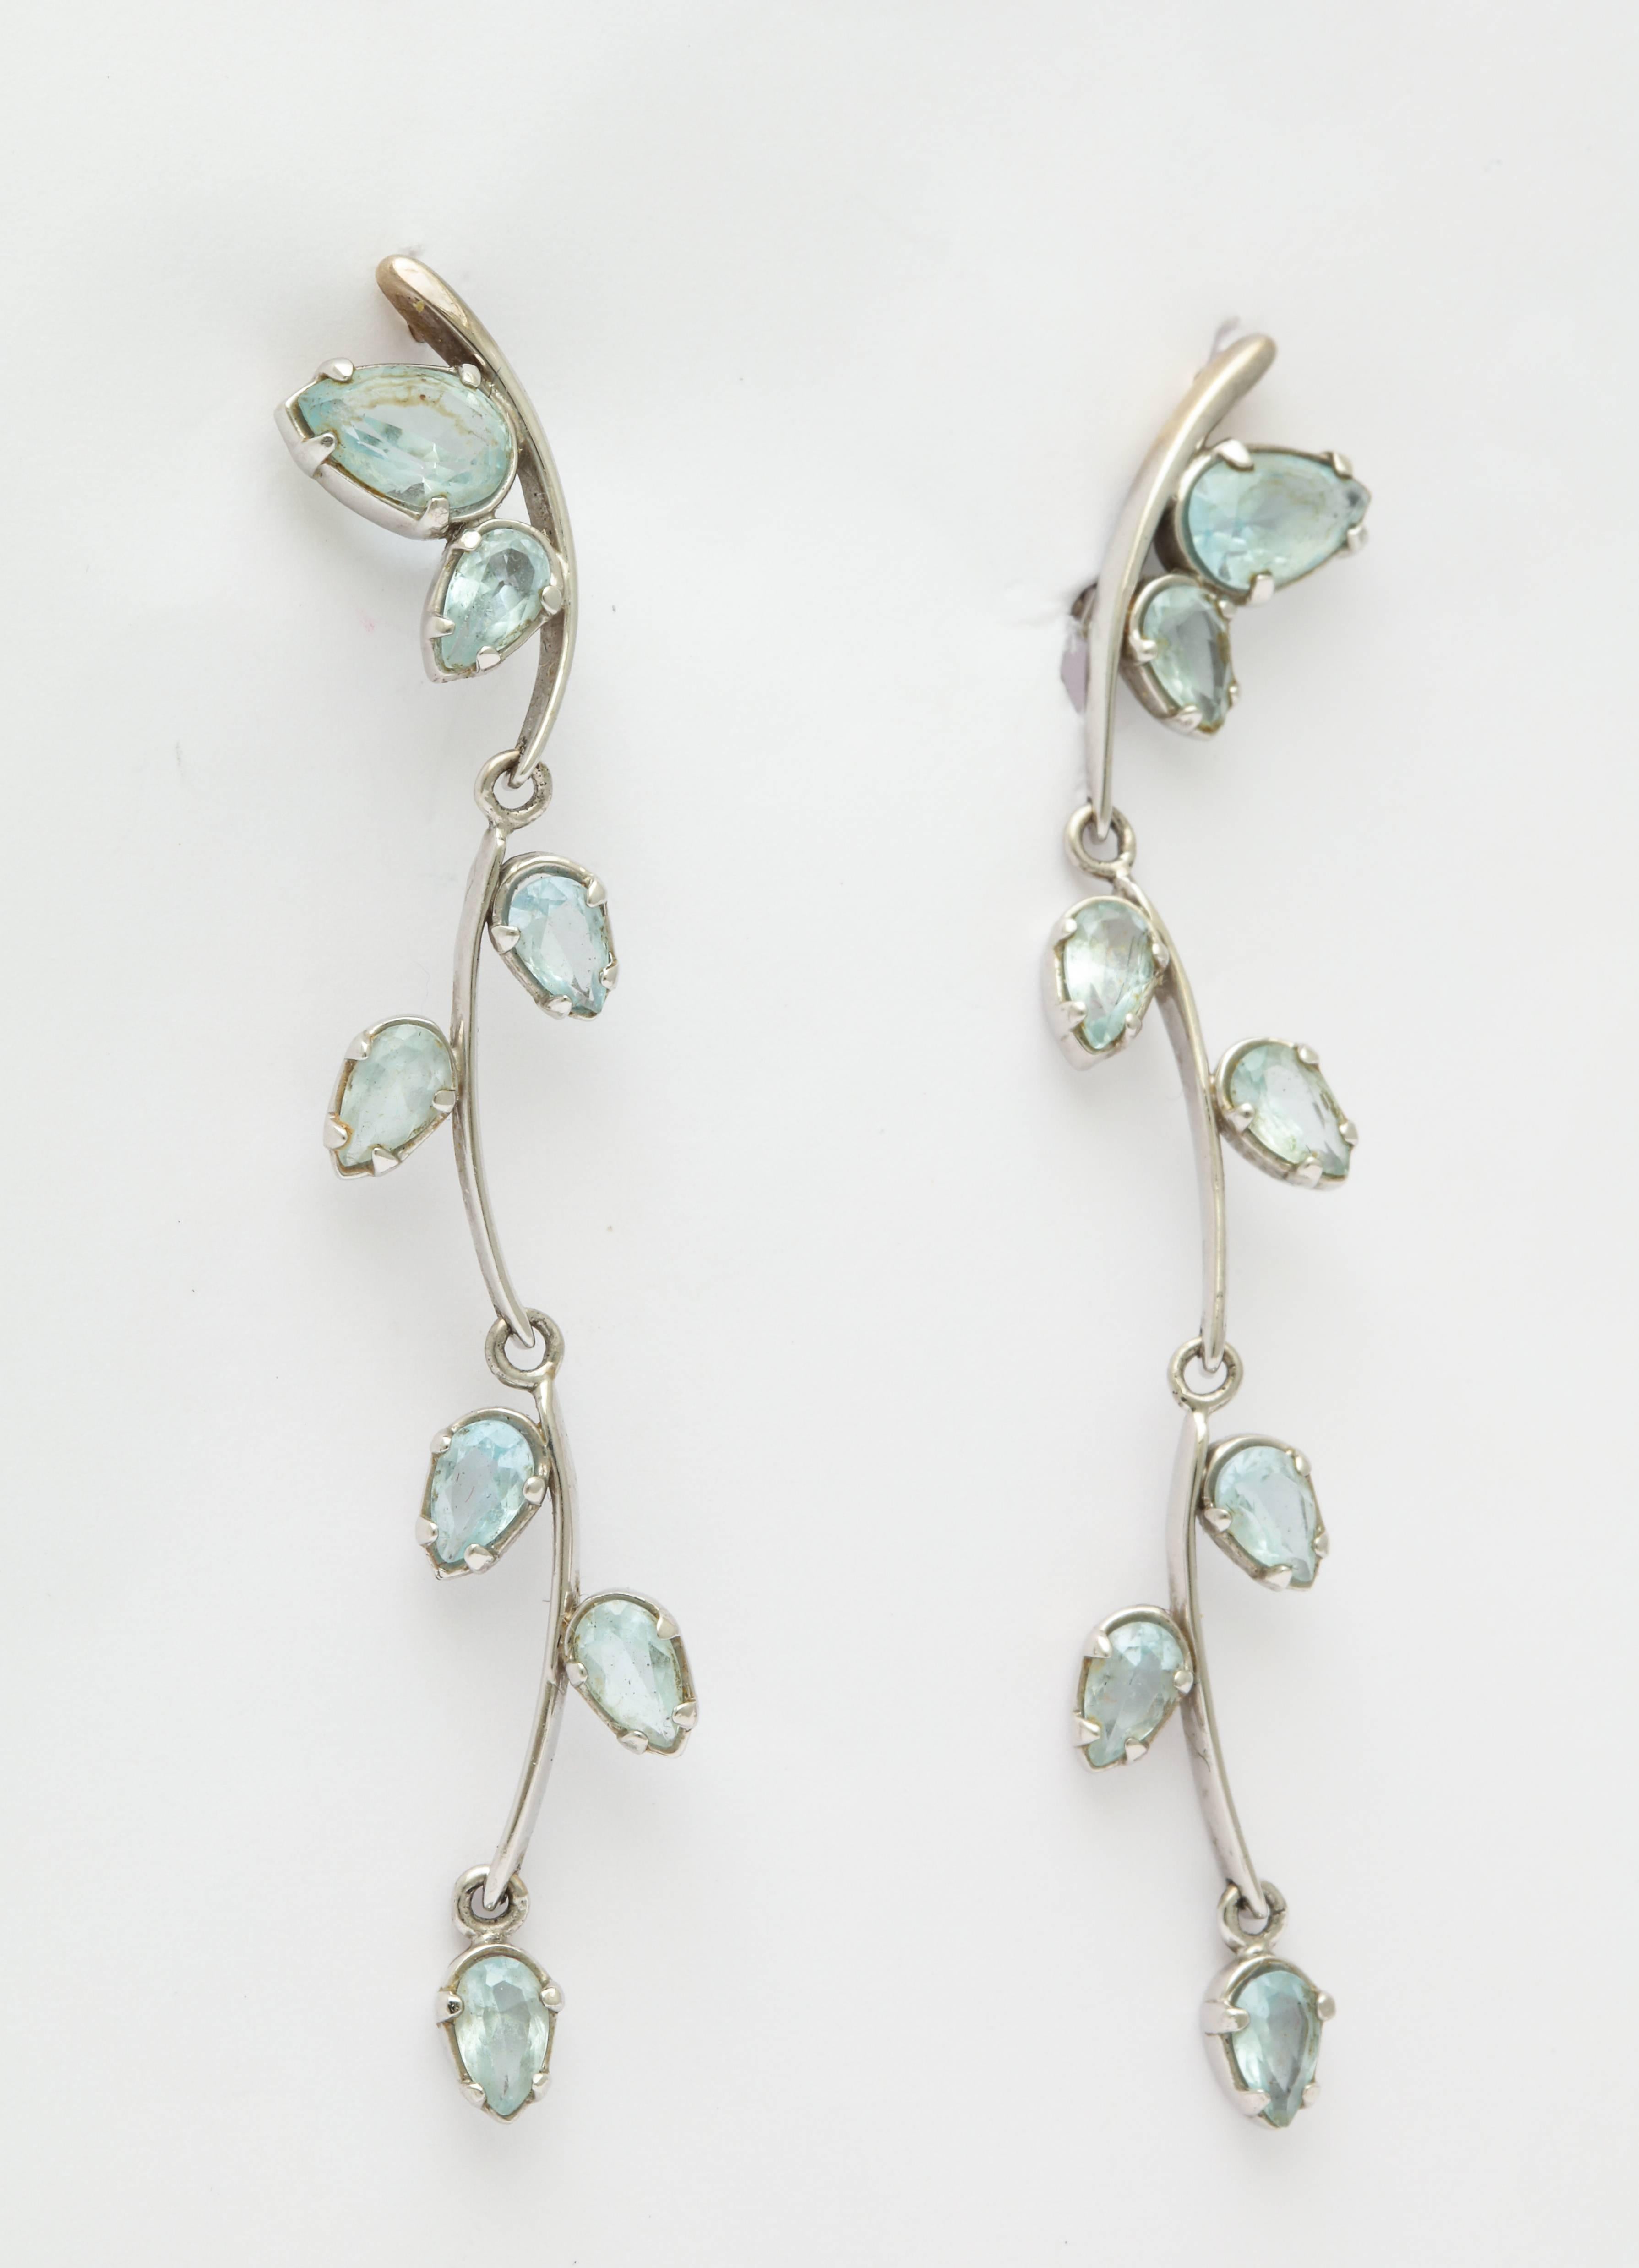 A great pair of drop earrings in 14 kt white gold with 7 faceted aquamarines on each.